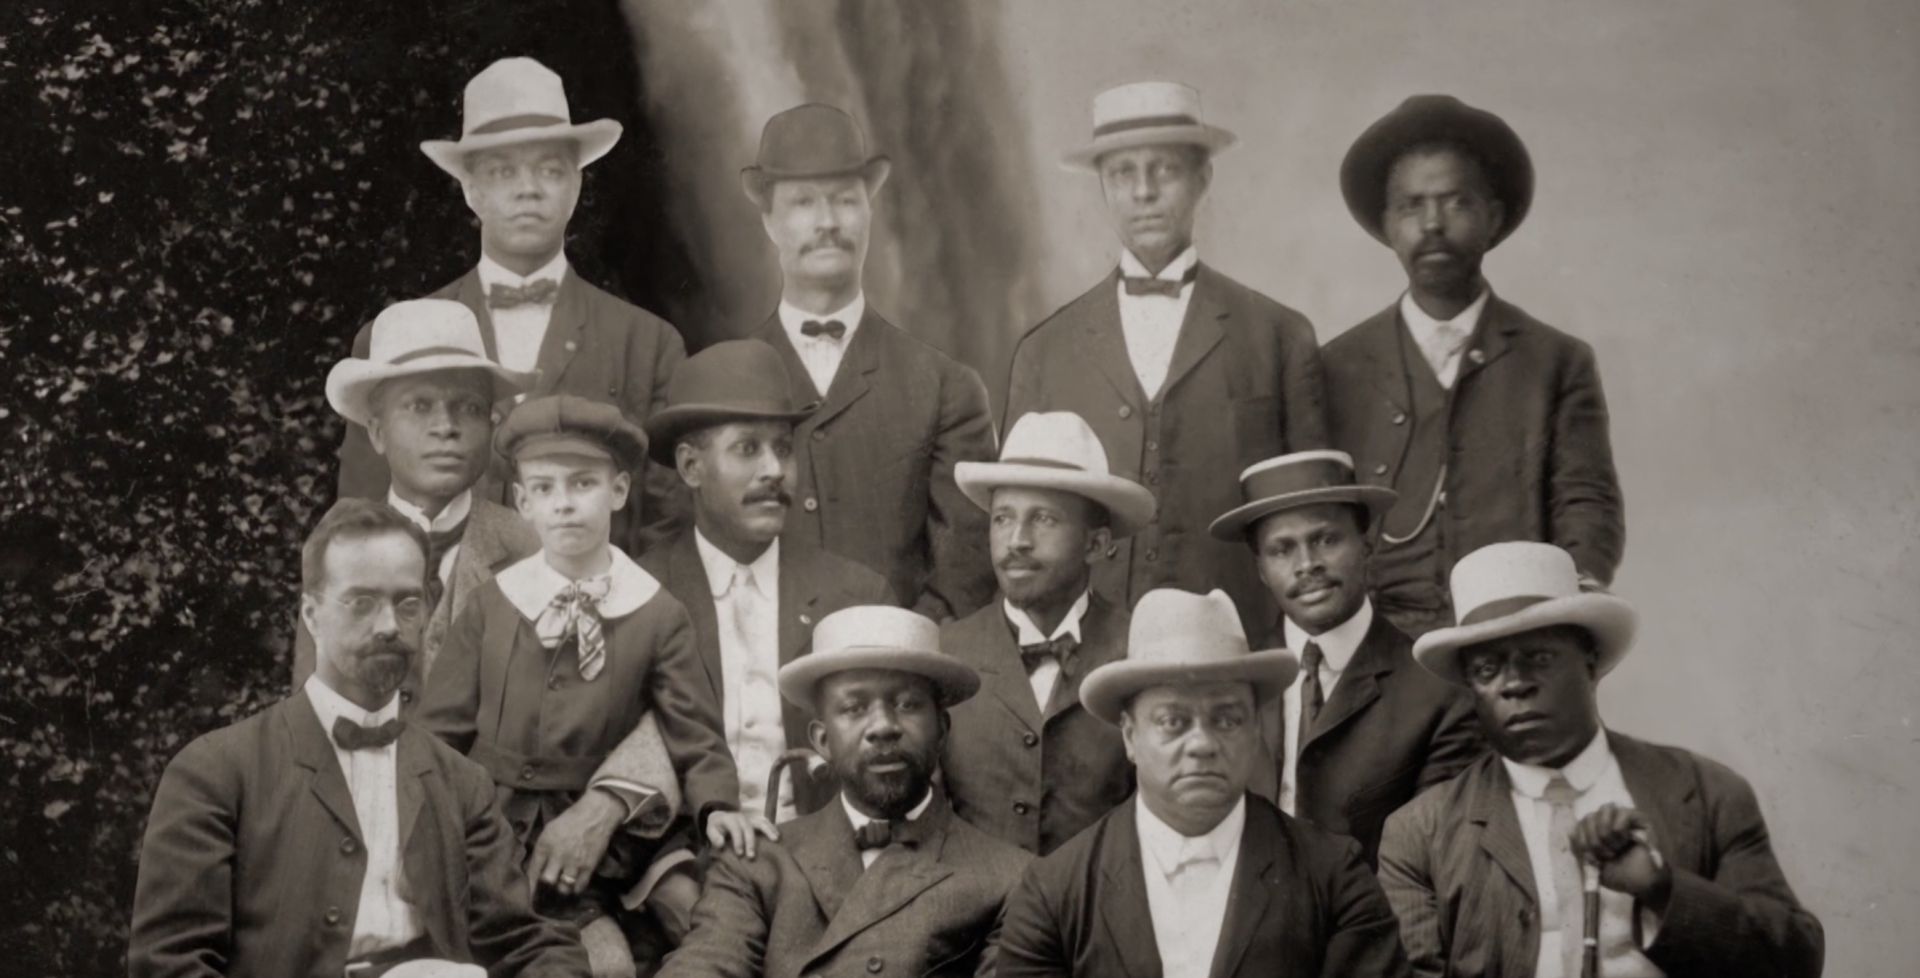 Twelve Black men and one Black boy, wearing turn-of-the-century clothing, sit in three rows for a photographic portrait.